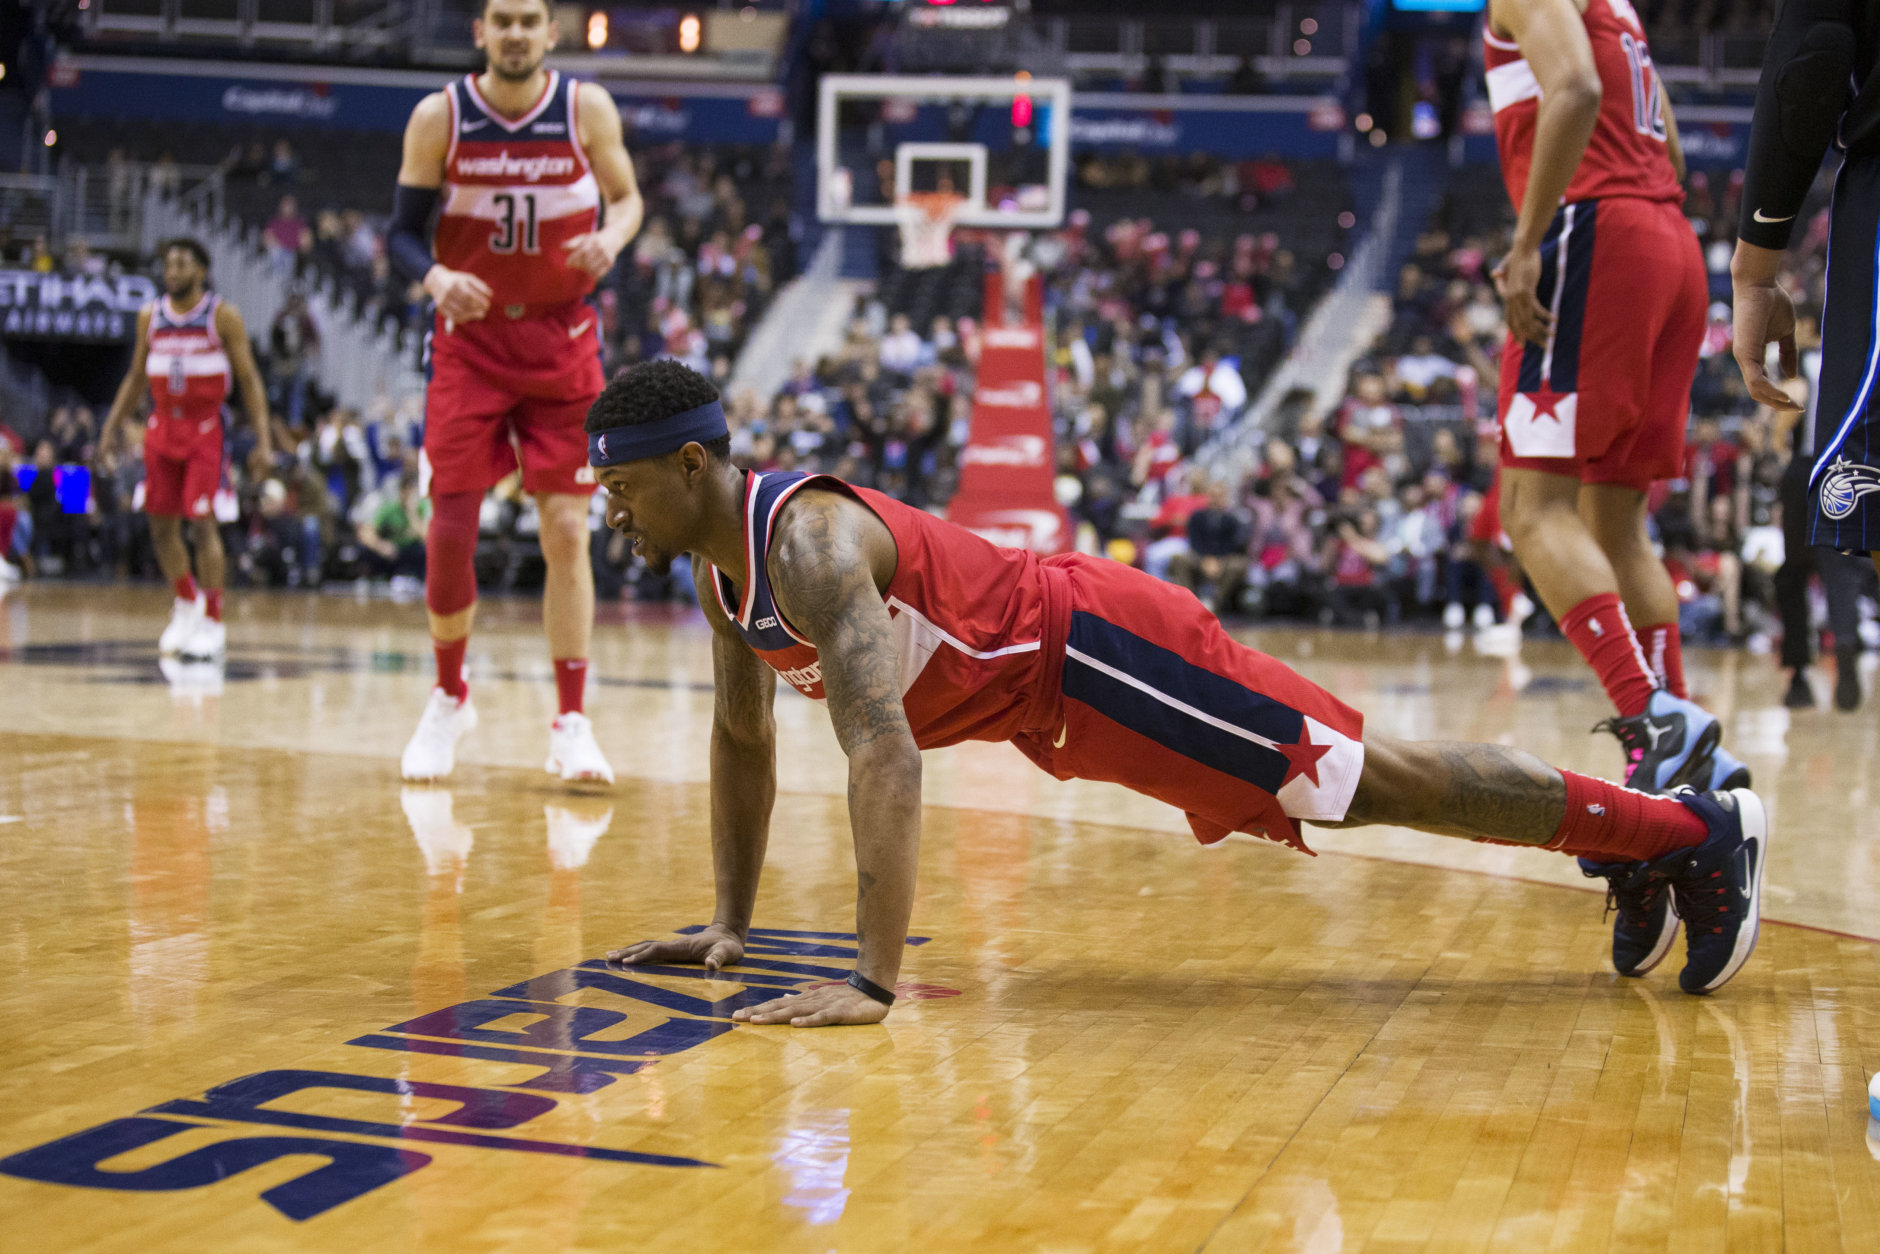 Washington Wizards guard Bradley Beal does a push-up after a play during the second half of the team's NBA basketball game against the Orlando Magic, Wednesday, March 13, 2019, in Washington. The Wizards won 100-90. (AP Photo/Alex Brandon)